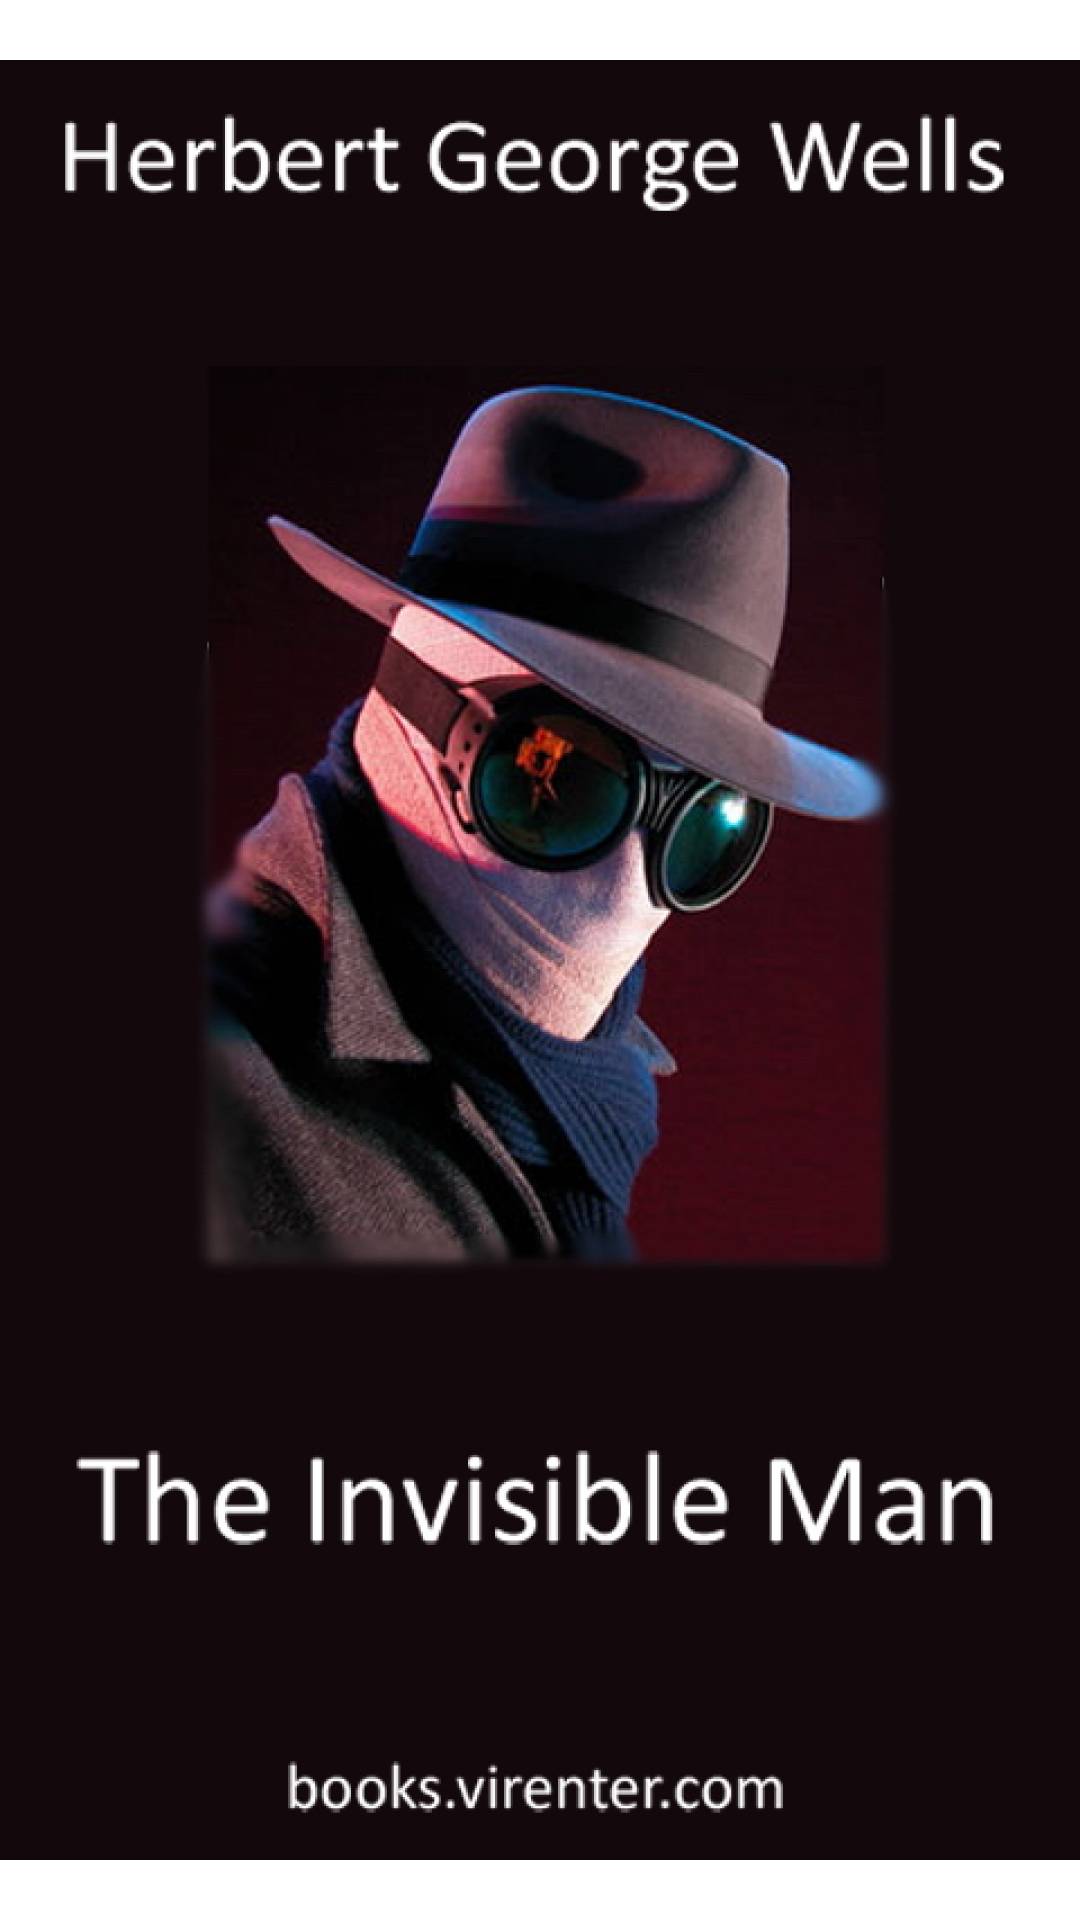 Herbert George Wells - The Invisible Man